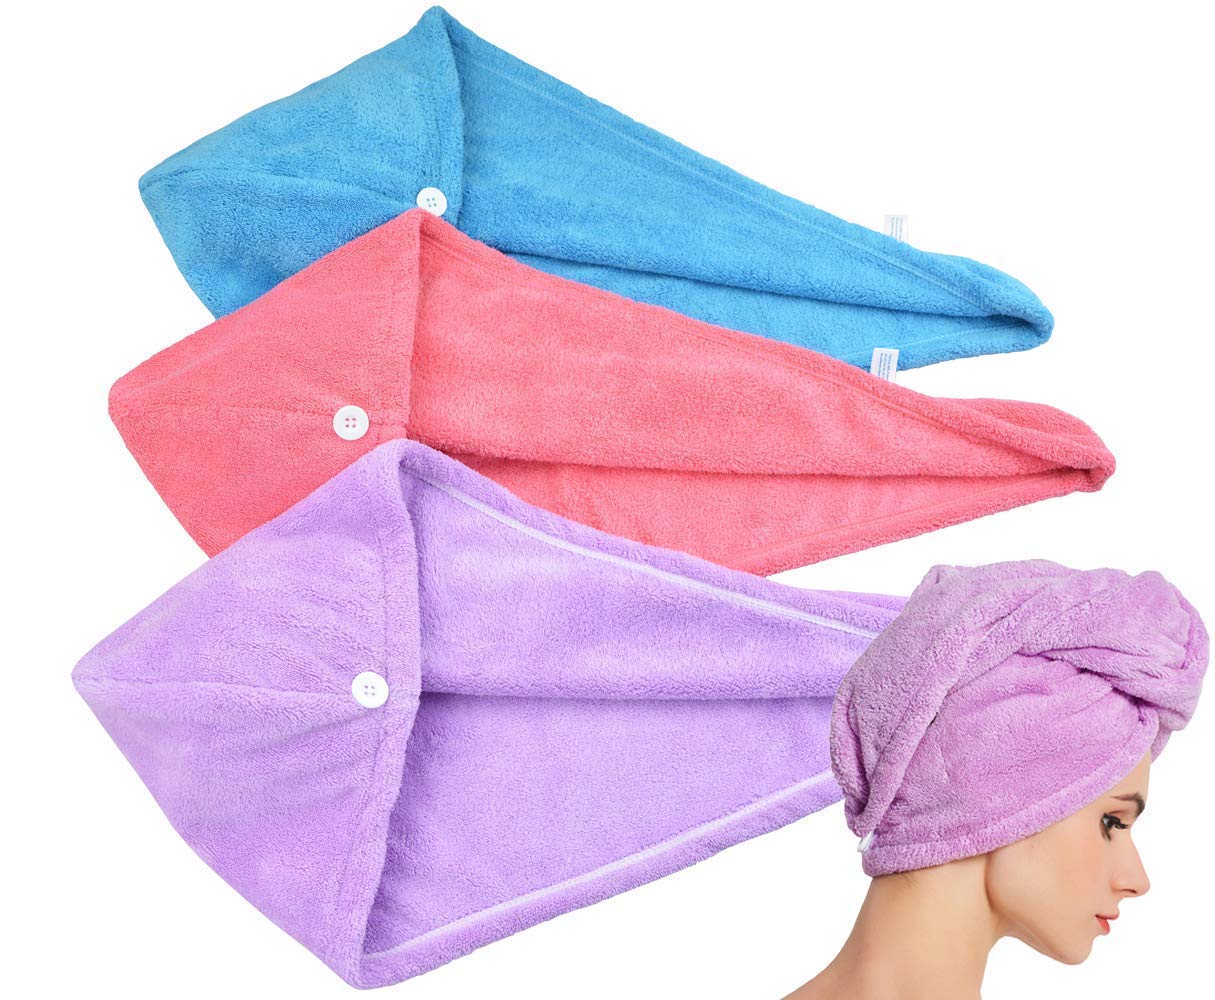 Cotton Hair Hair Wrap Drying Super Absorbent Bath Essential Microfiber Towelpink  Price in India  Buy Cotton Hair Hair Wrap Drying Super Absorbent Bath  Essential Microfiber Towelpink online at Flipkartcom